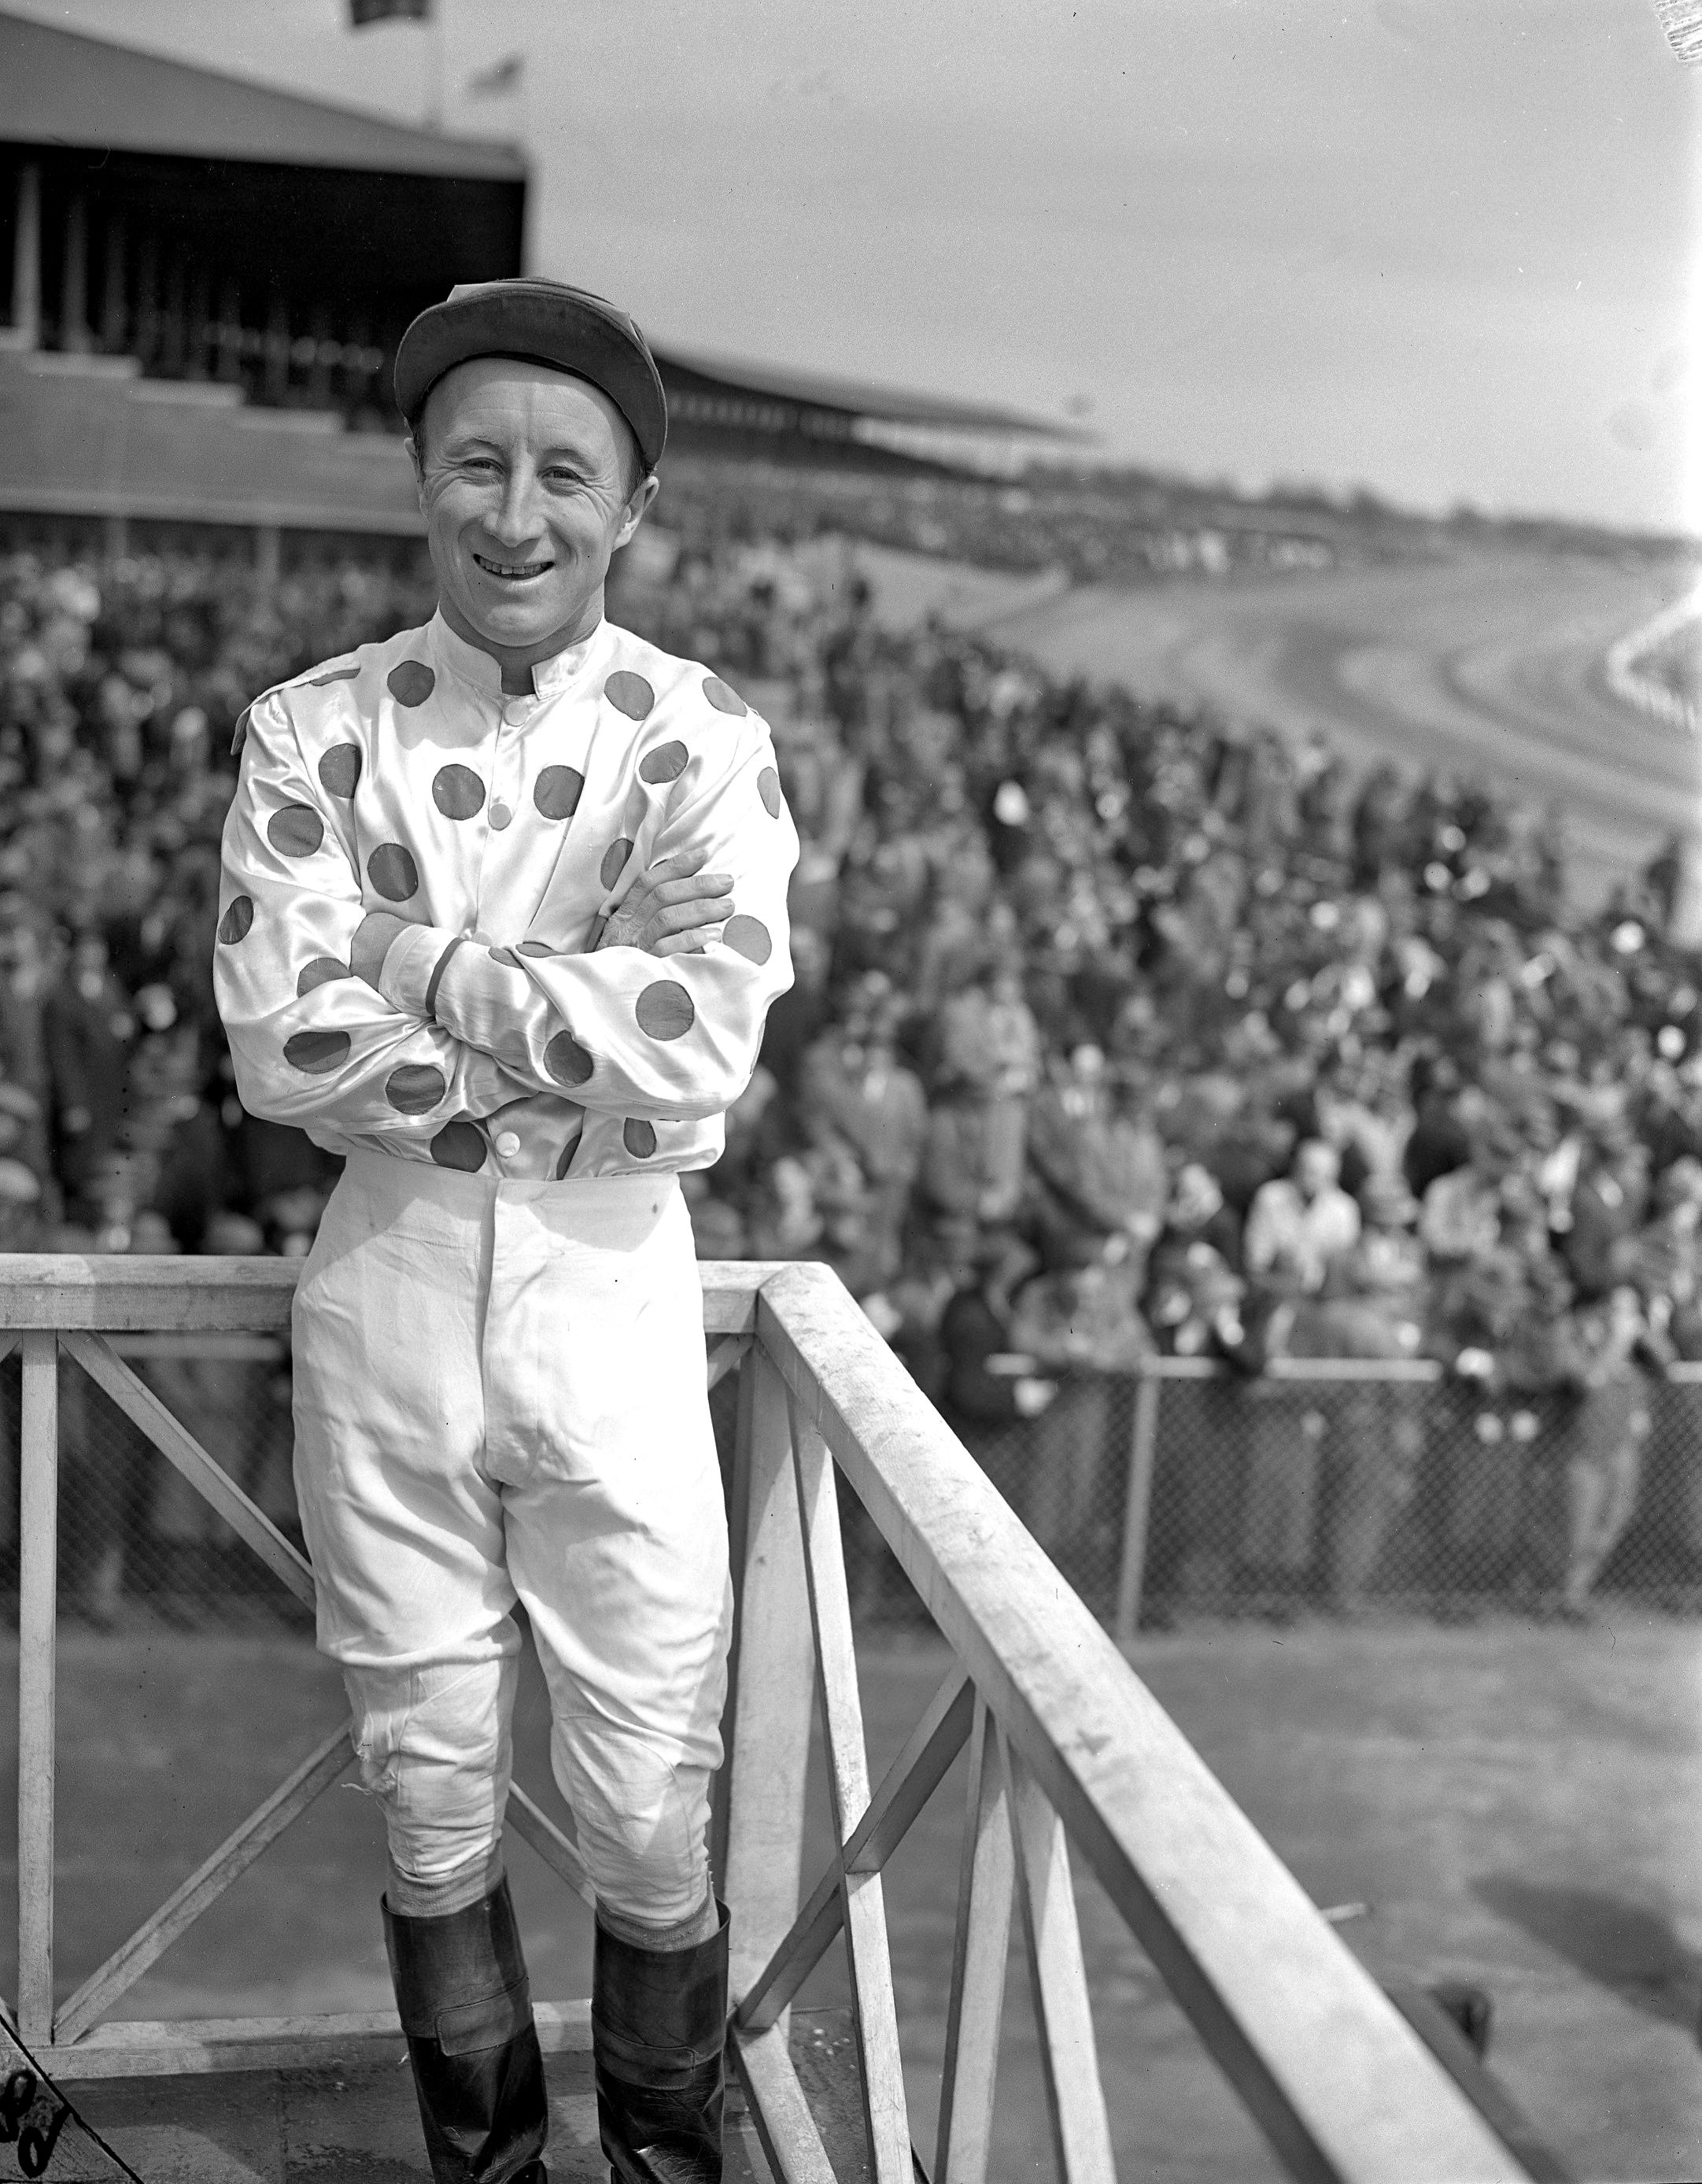 James Stout at Jamaica Racetrack, 1946 (Keeneland Library Morgan Collection)